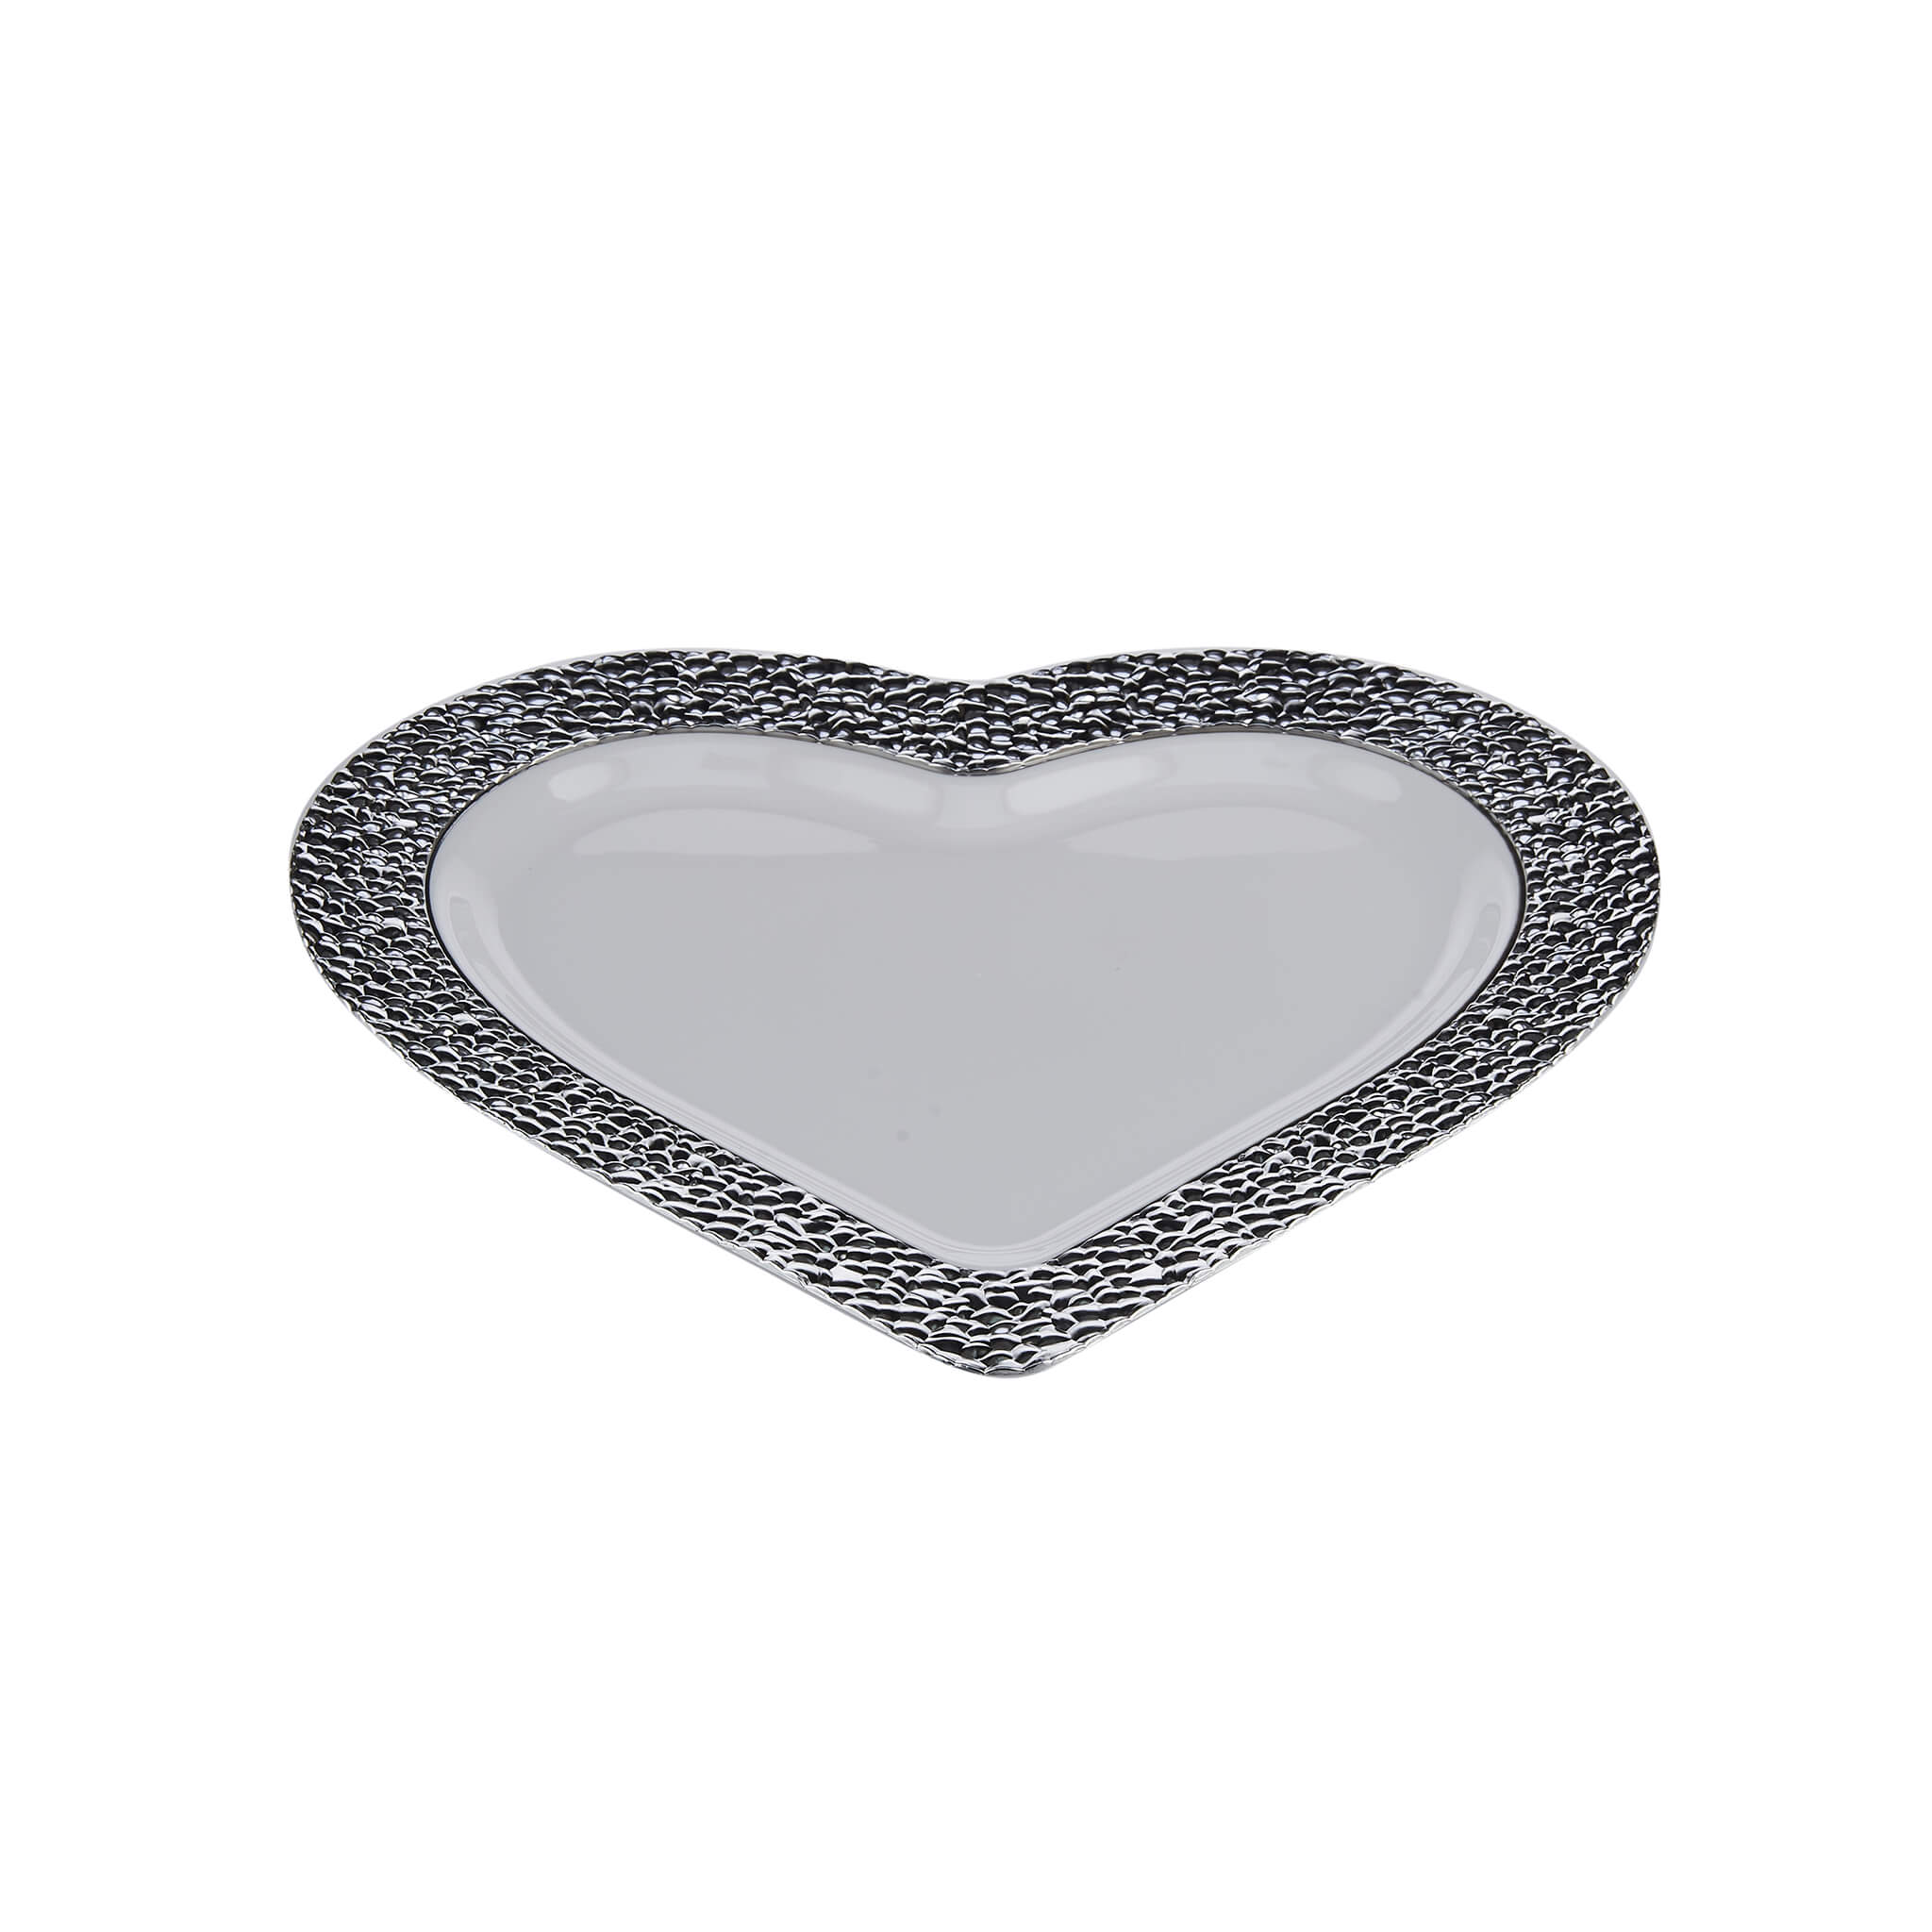 Premium Design Heart Plate with Silver Rim 10 Pieces - Hotpack Global